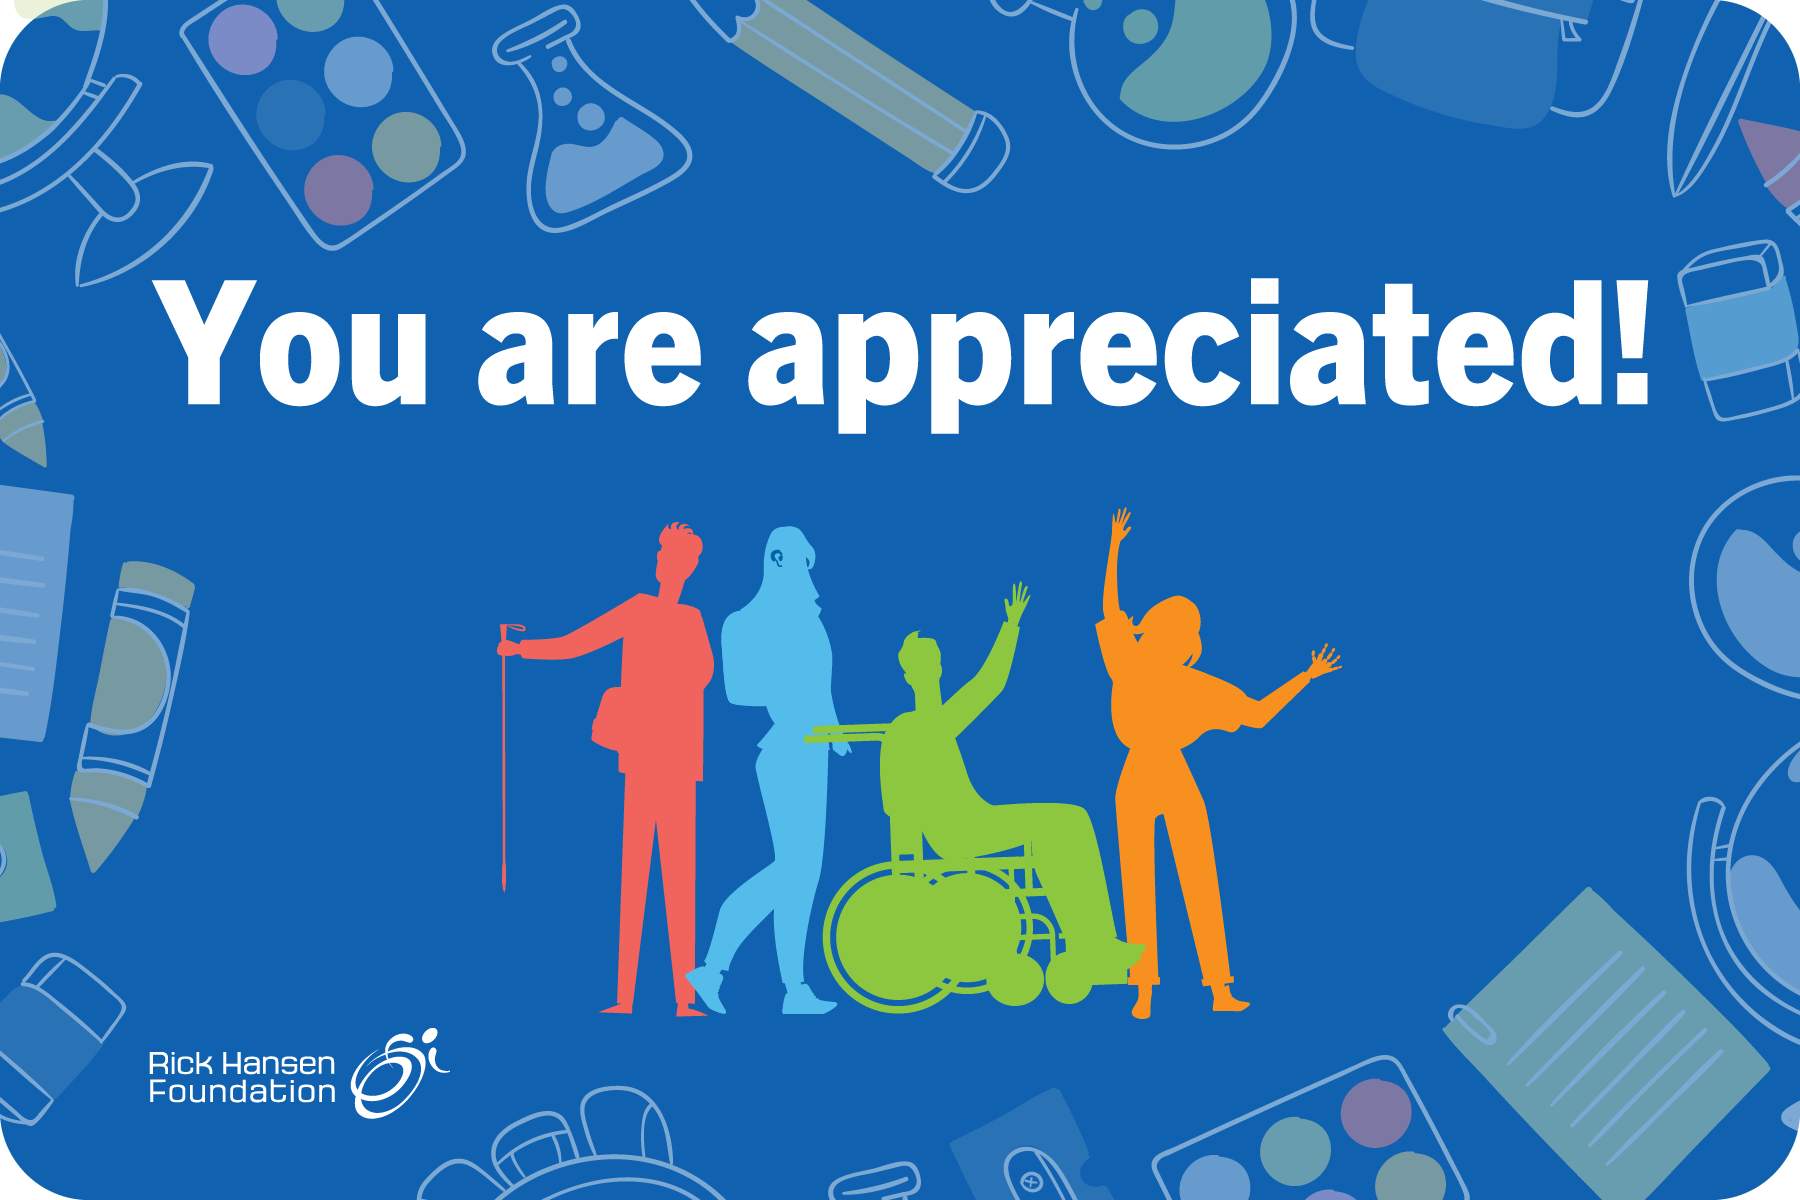 Blue background with colourful outlines of four people of different abilities. “You are appreciated” is written in white text. Various classroom items create a boarder. The Rick Hansen Foundation logo is in the bottom left corner.